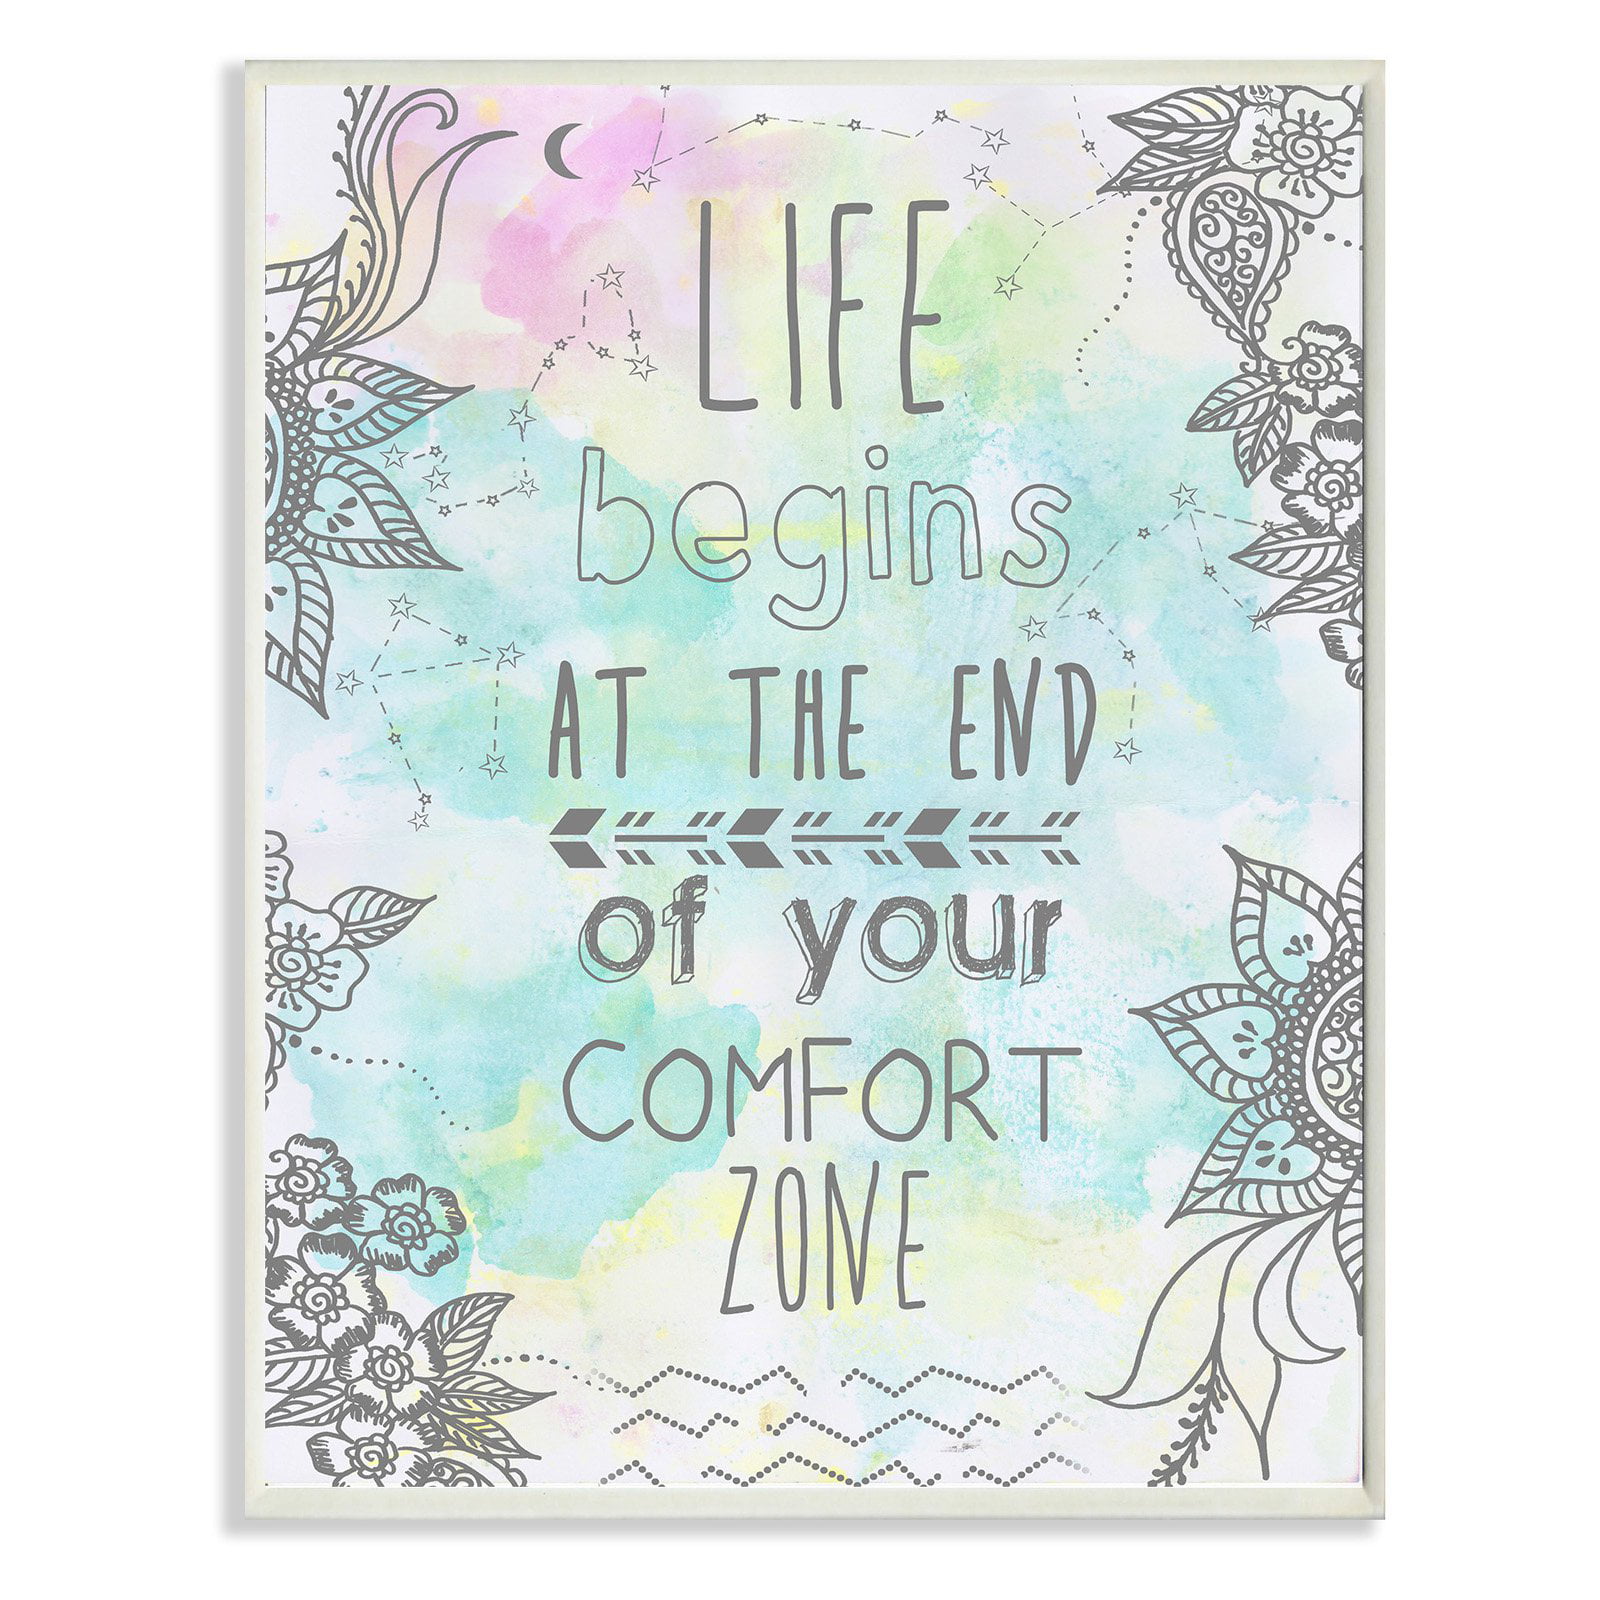 NEW Classroom Motivational Poster Life Begins at the Edge of Your Comfort Zone 